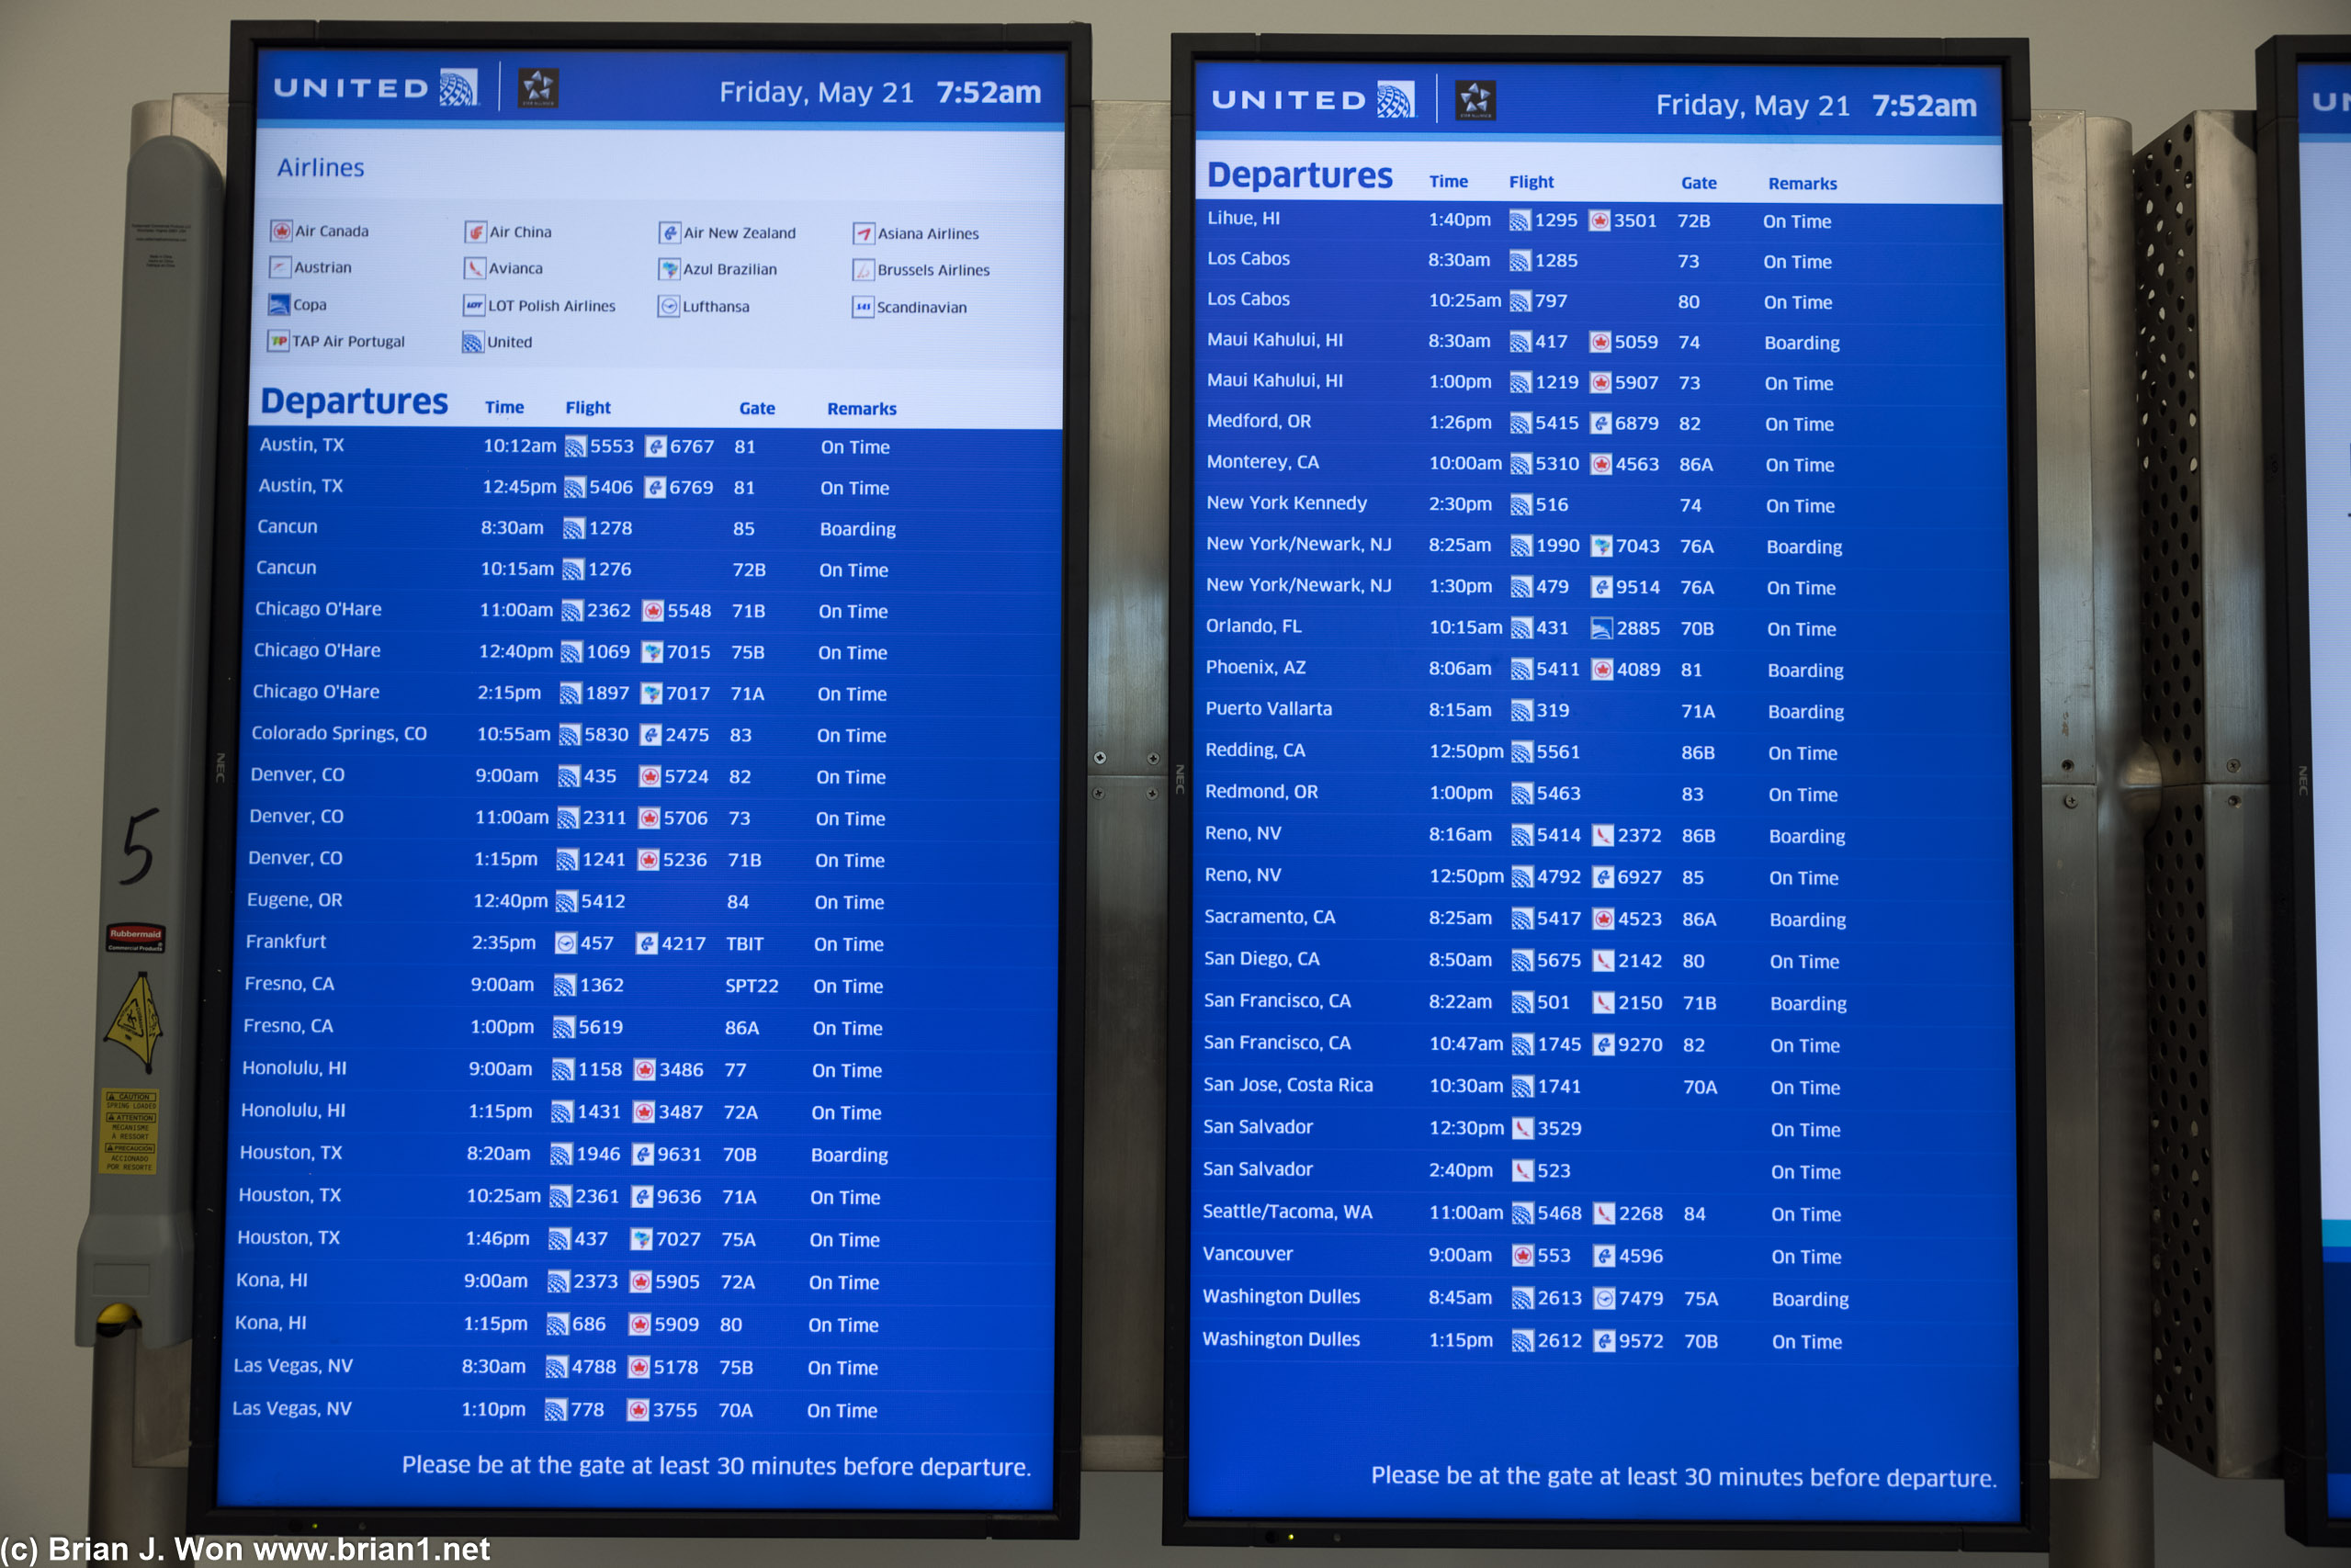 Not even 8am and the flight board is still pretty damned sad.